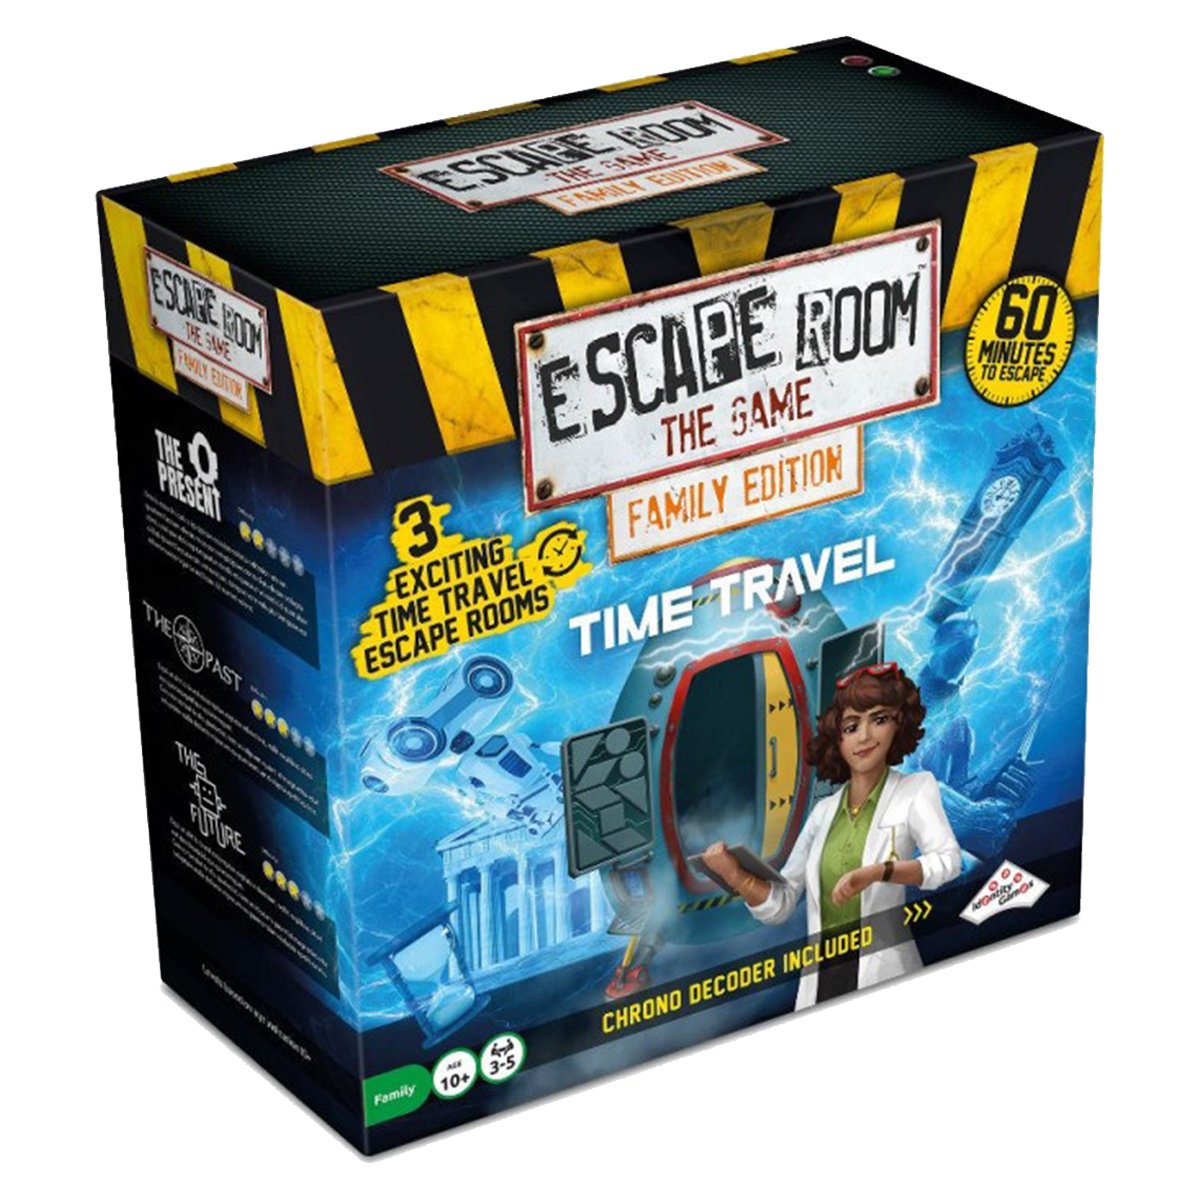 Family Time Travel - Escape Room the Game